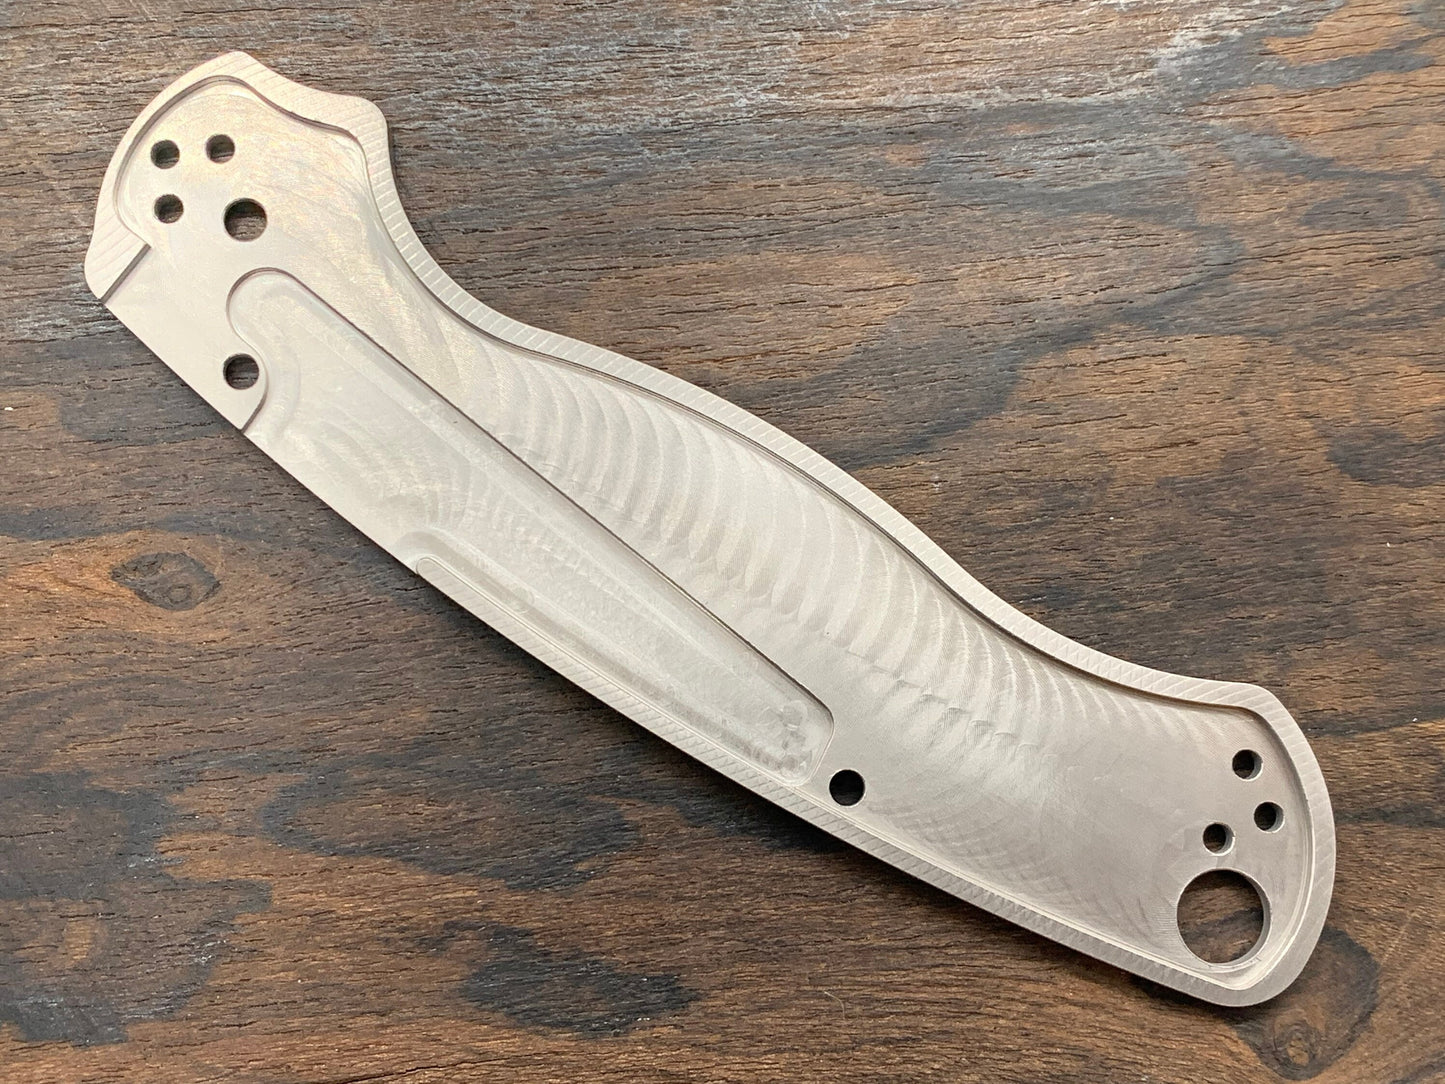 Tumbled Brass Scales for Spyderco Paramilitary 2 PM2